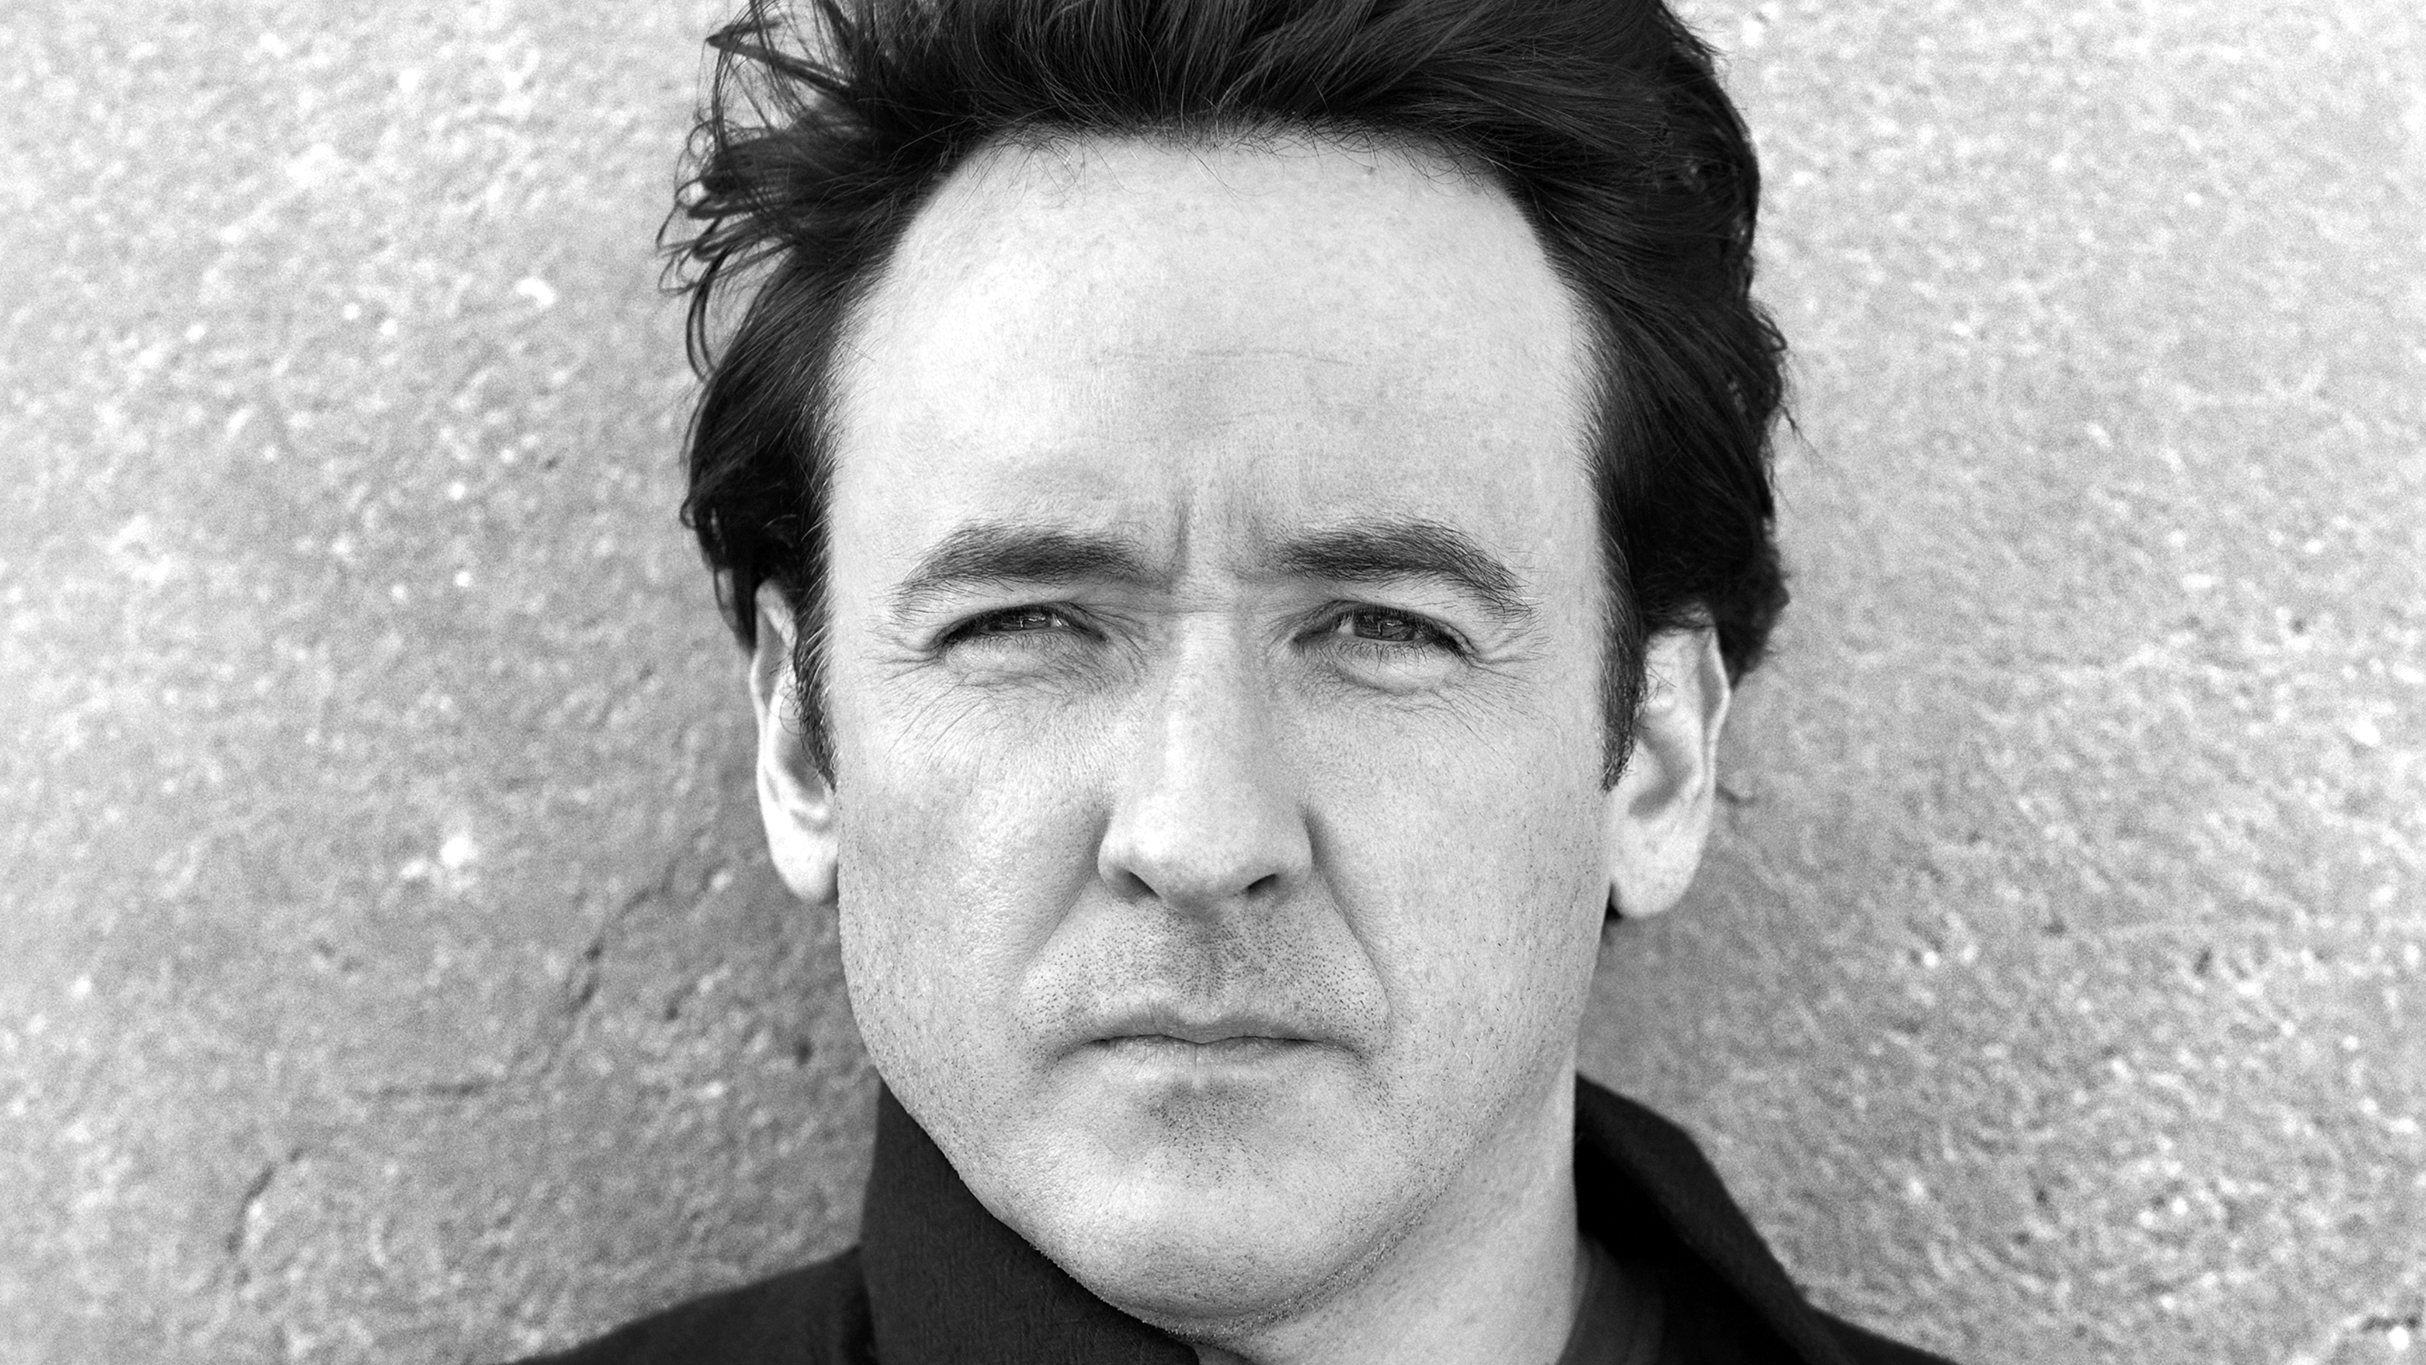 An Evening with John Cusack and Screening of "Say Anything"